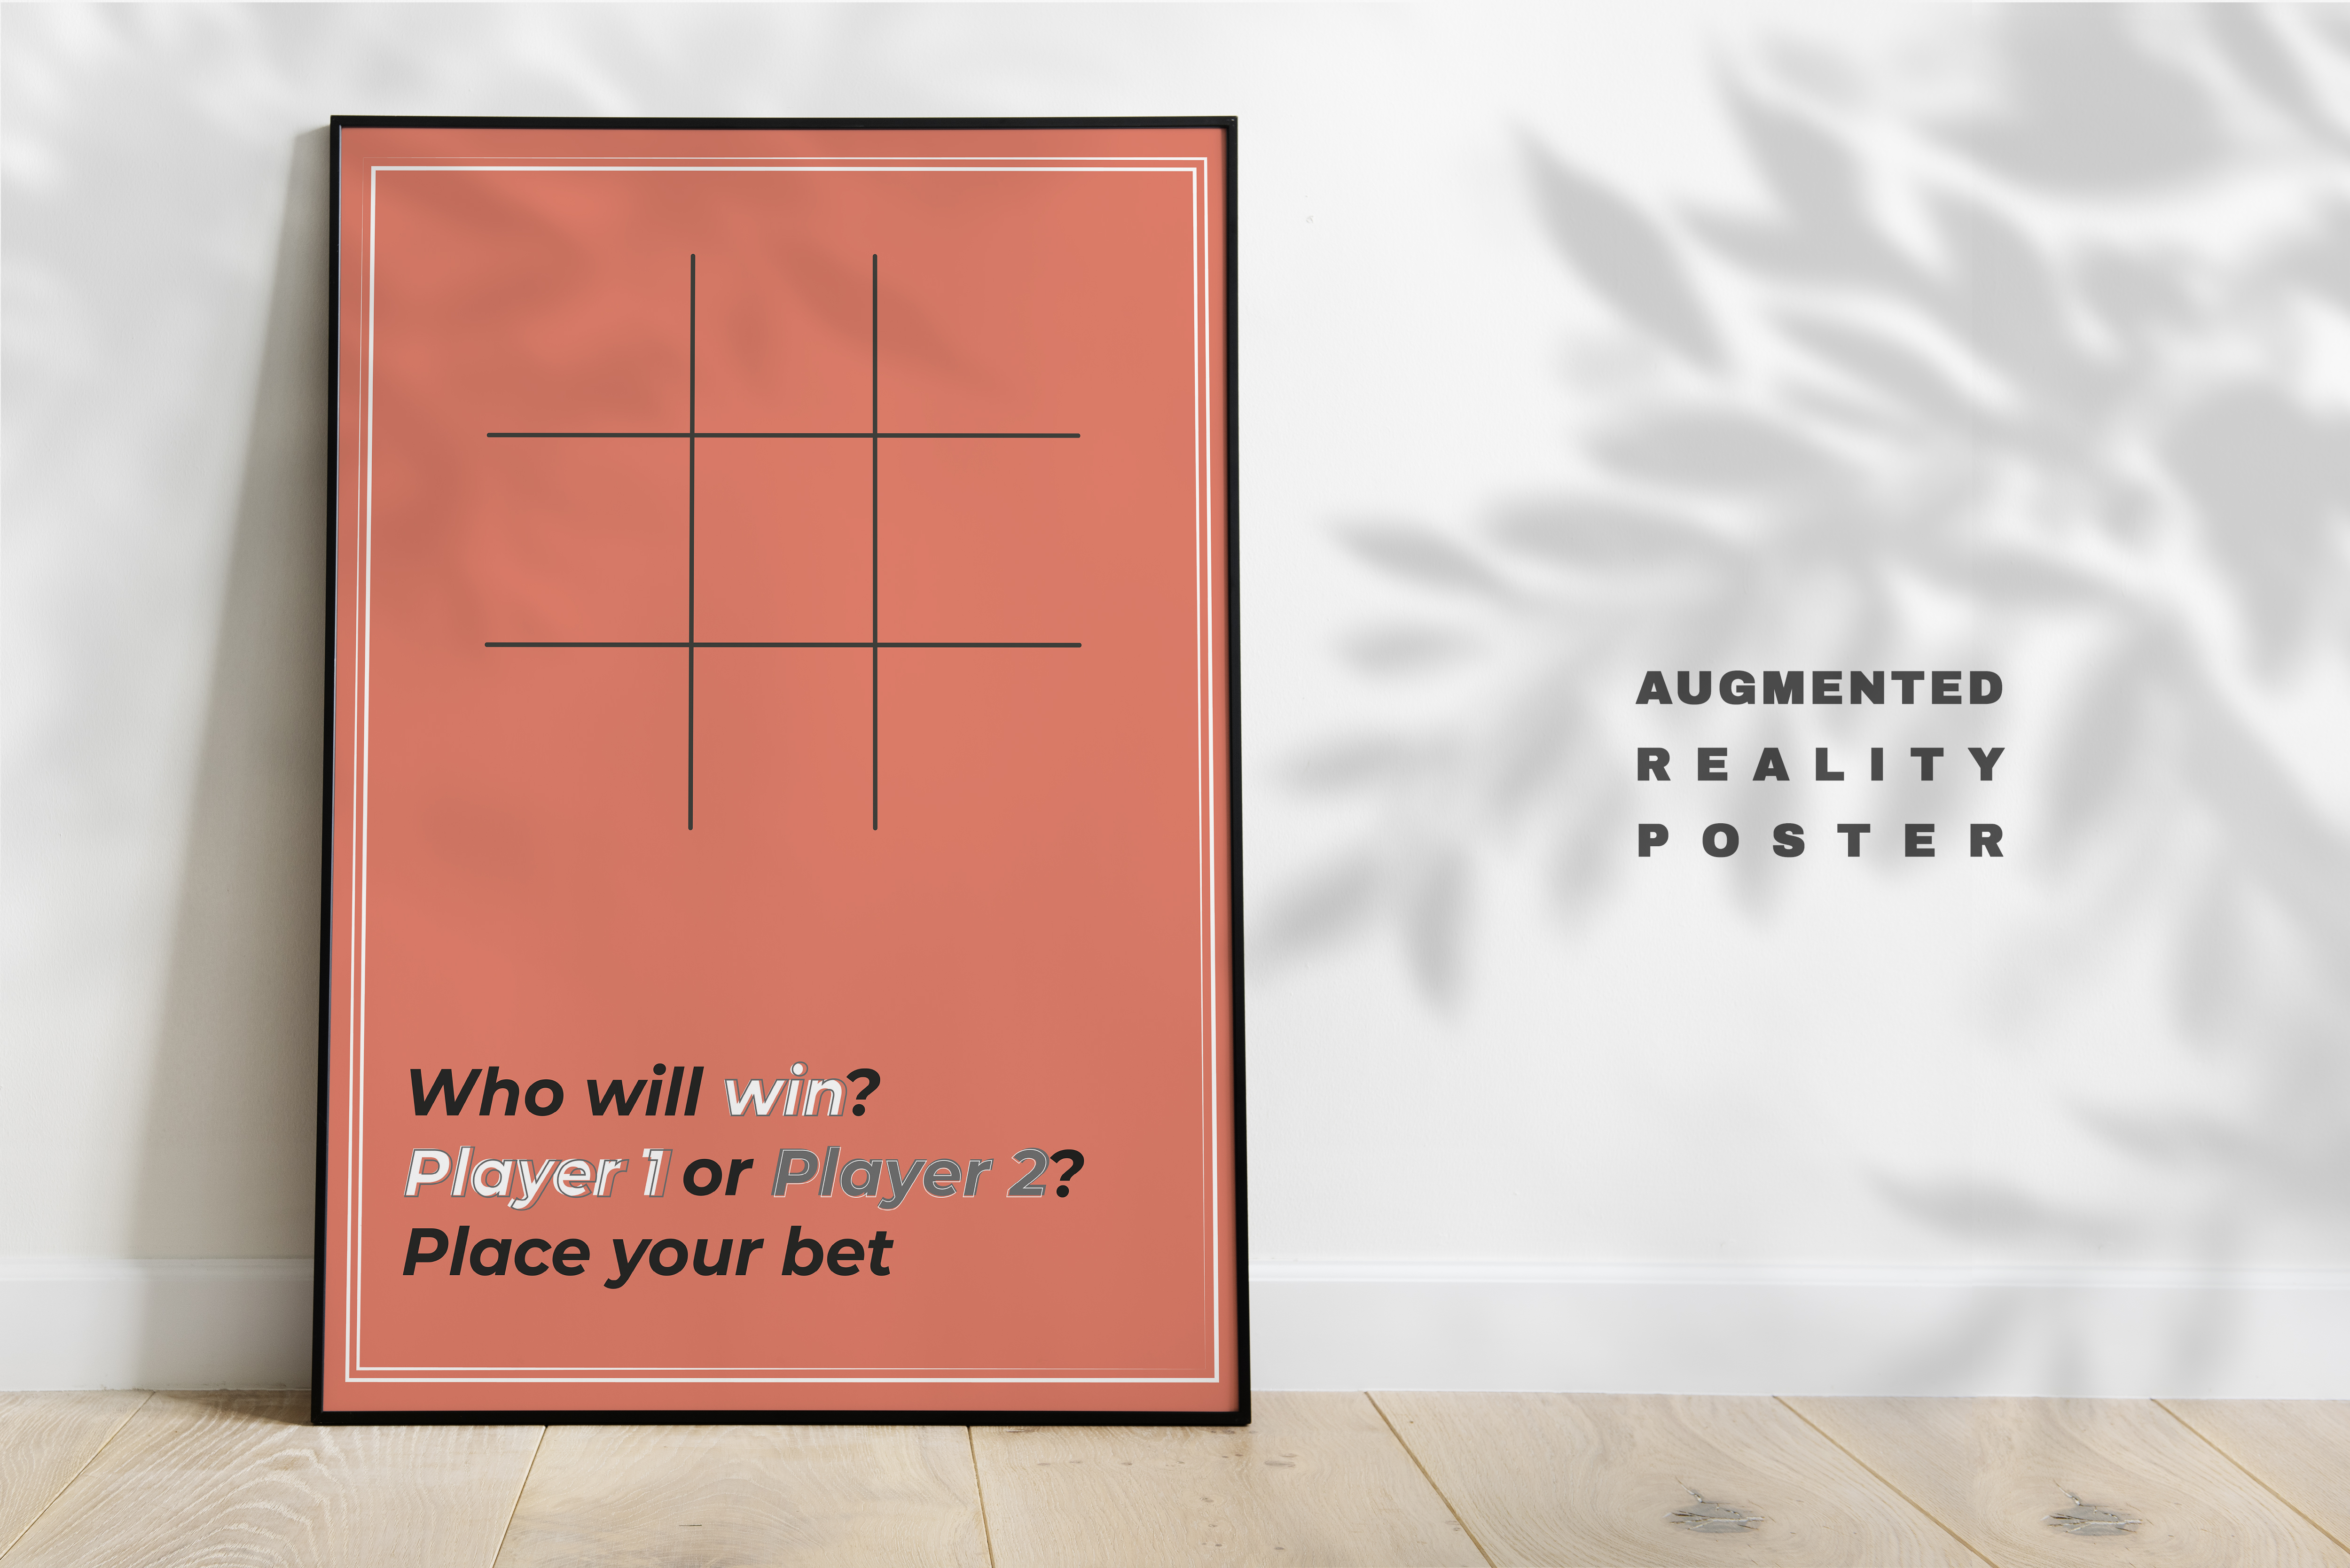 AUGMENTED
REALITY
POSTER